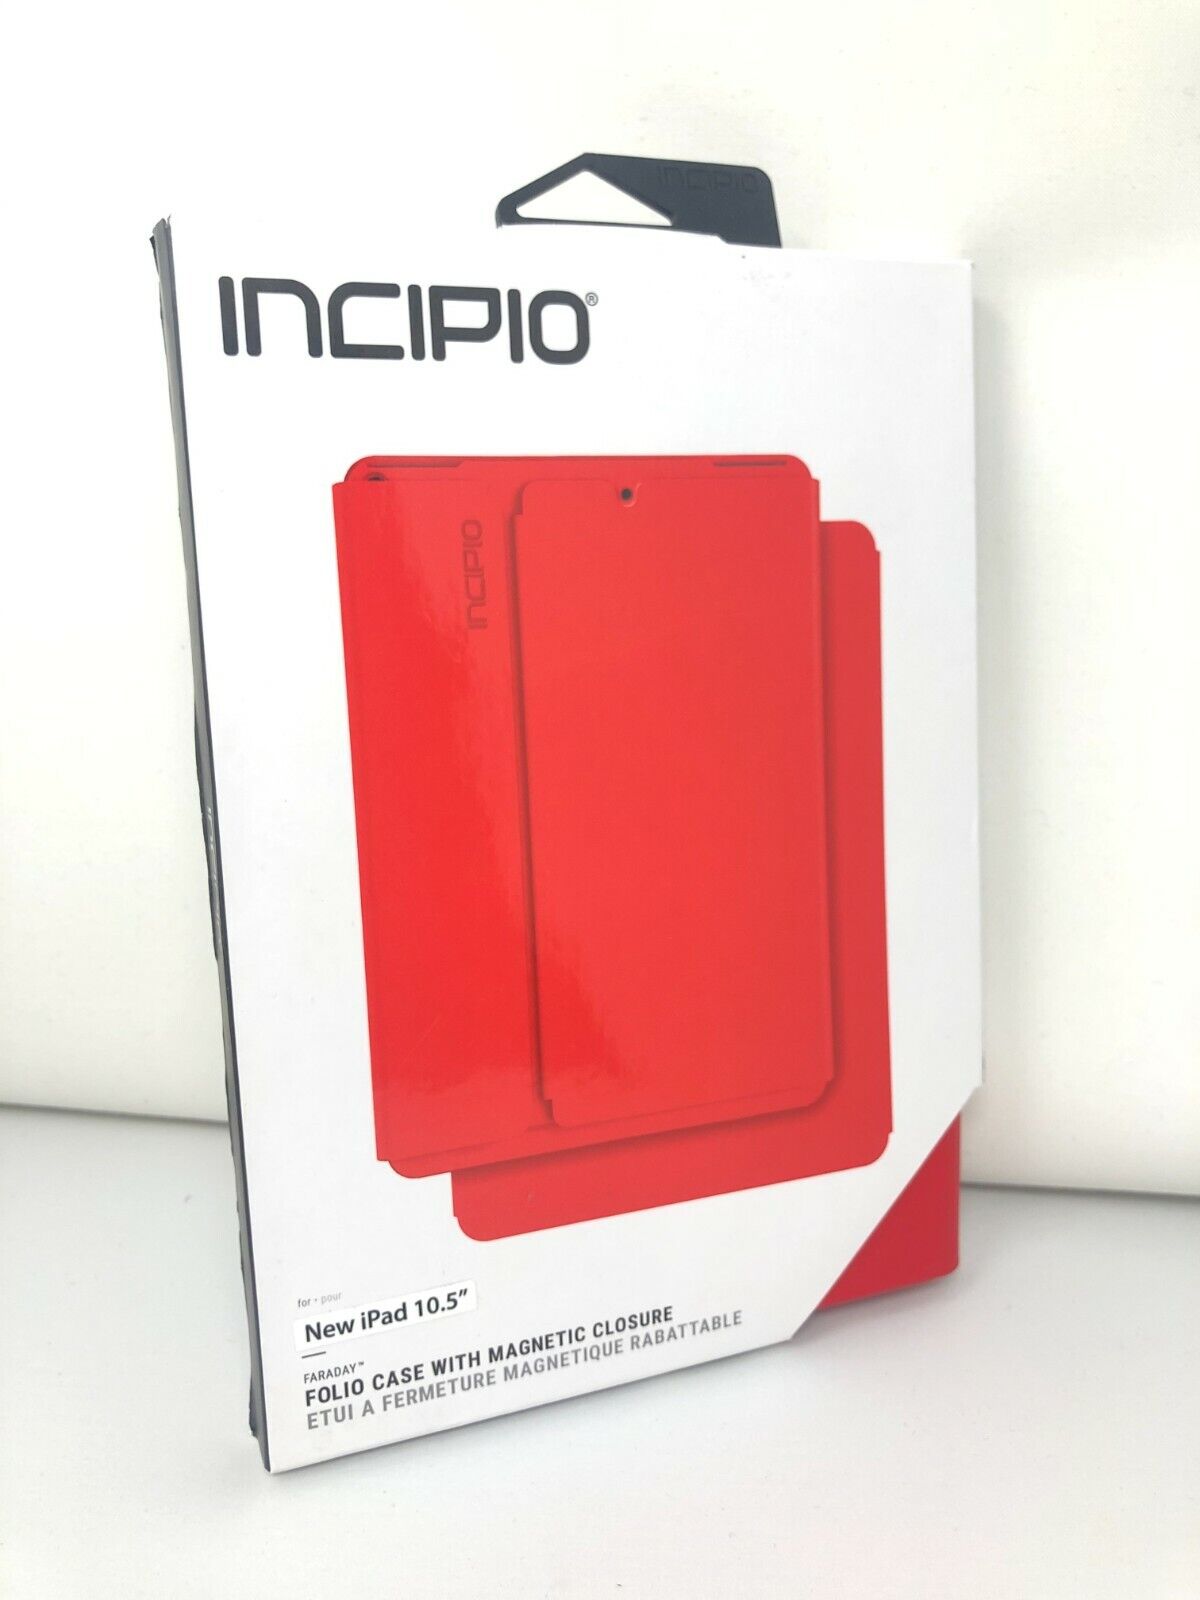 With Magnetic Closure For Ipad Pro Air 10.5 - Red